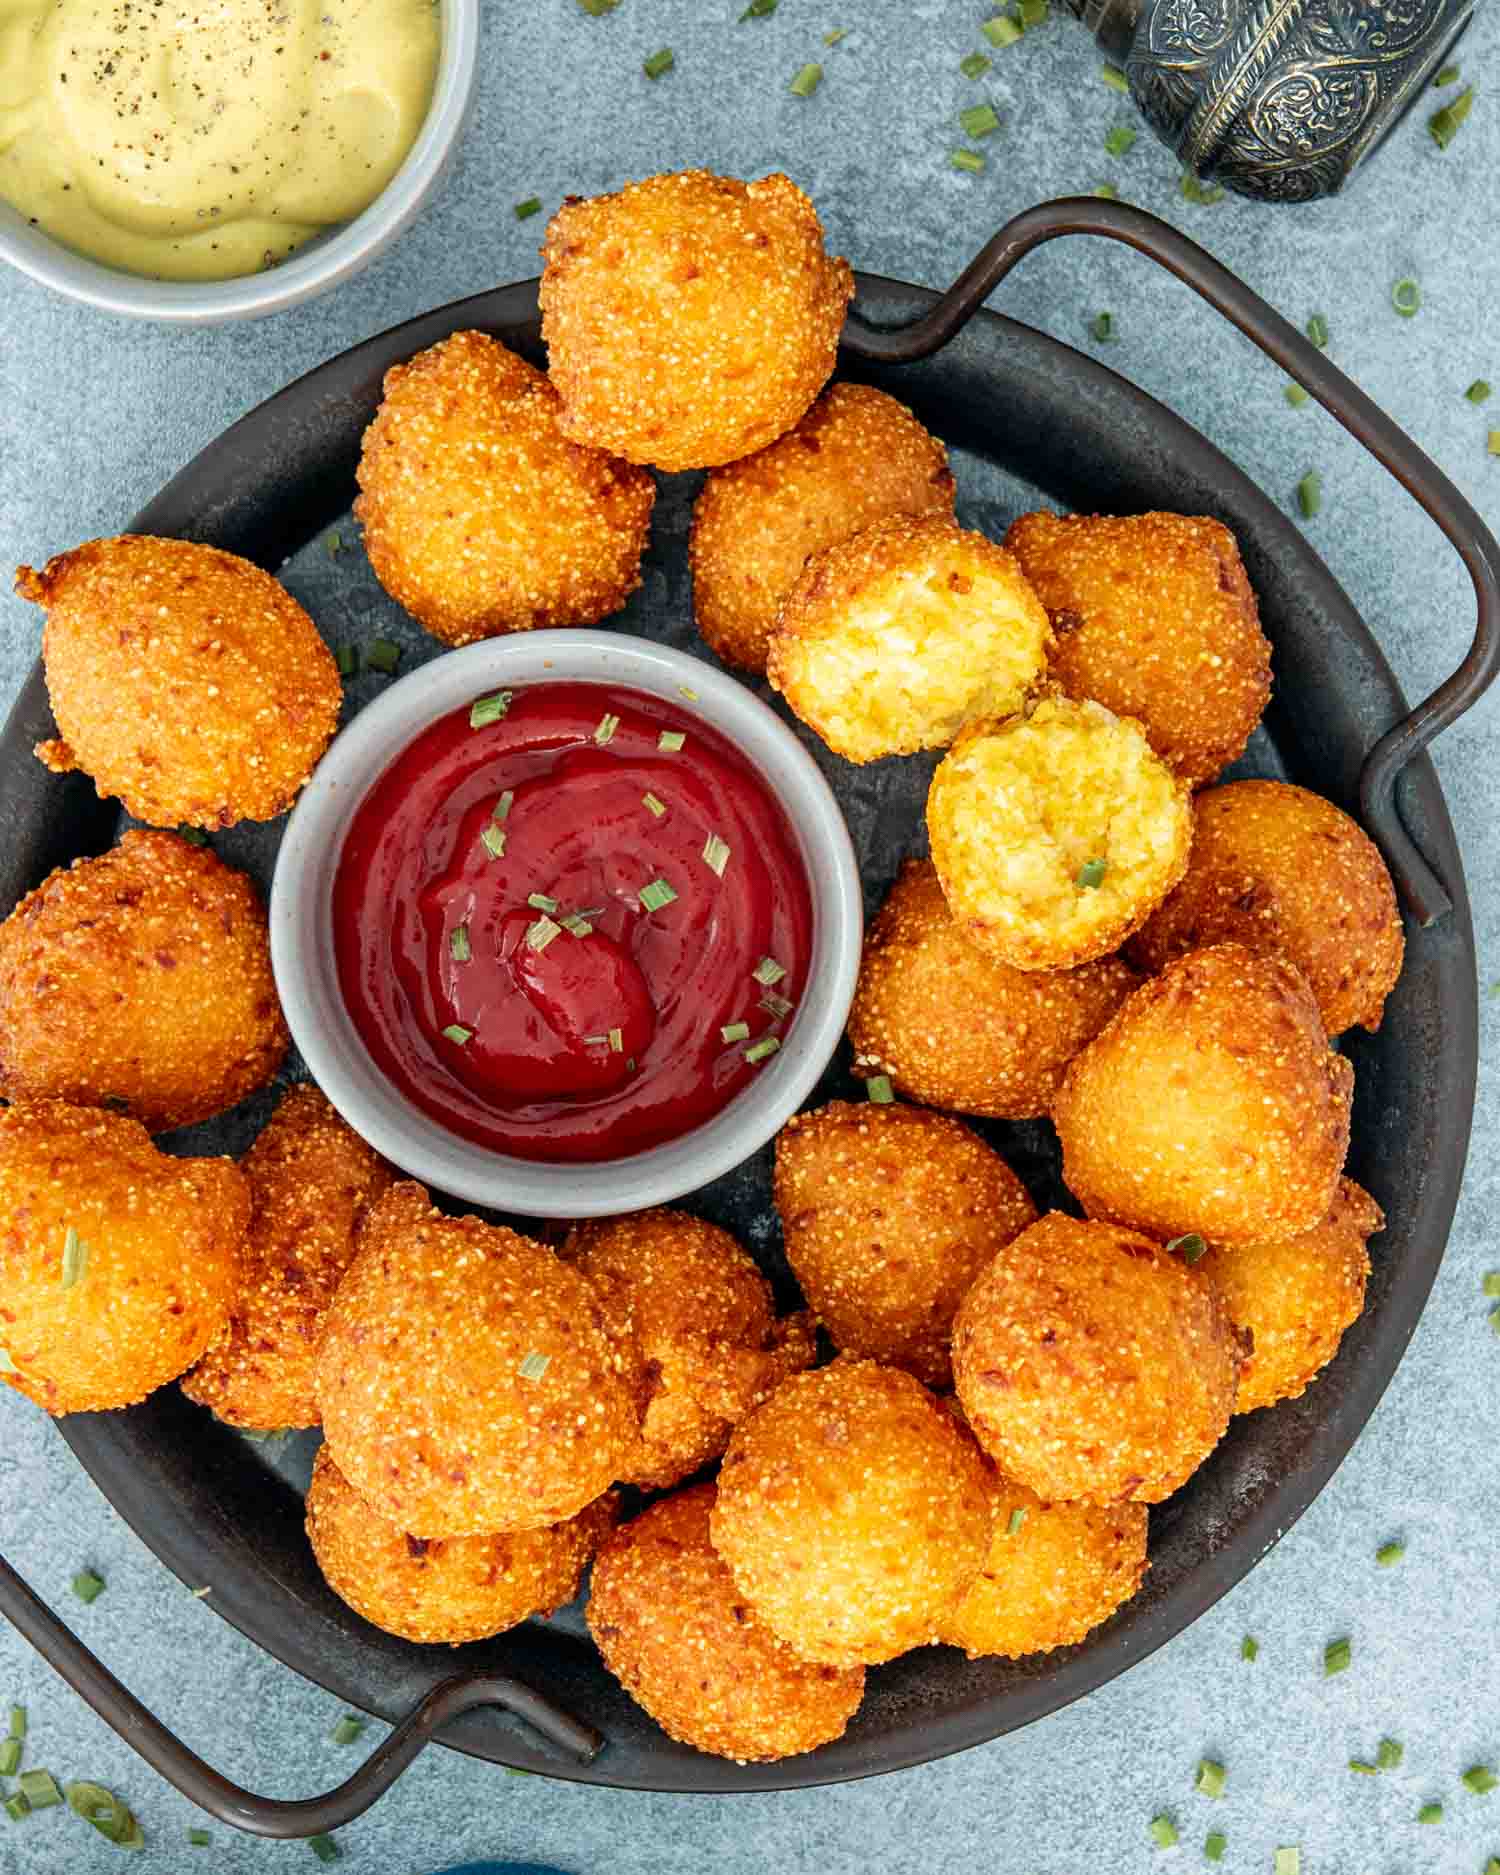 hush puppies on a plate with a little bowl with ketchup.